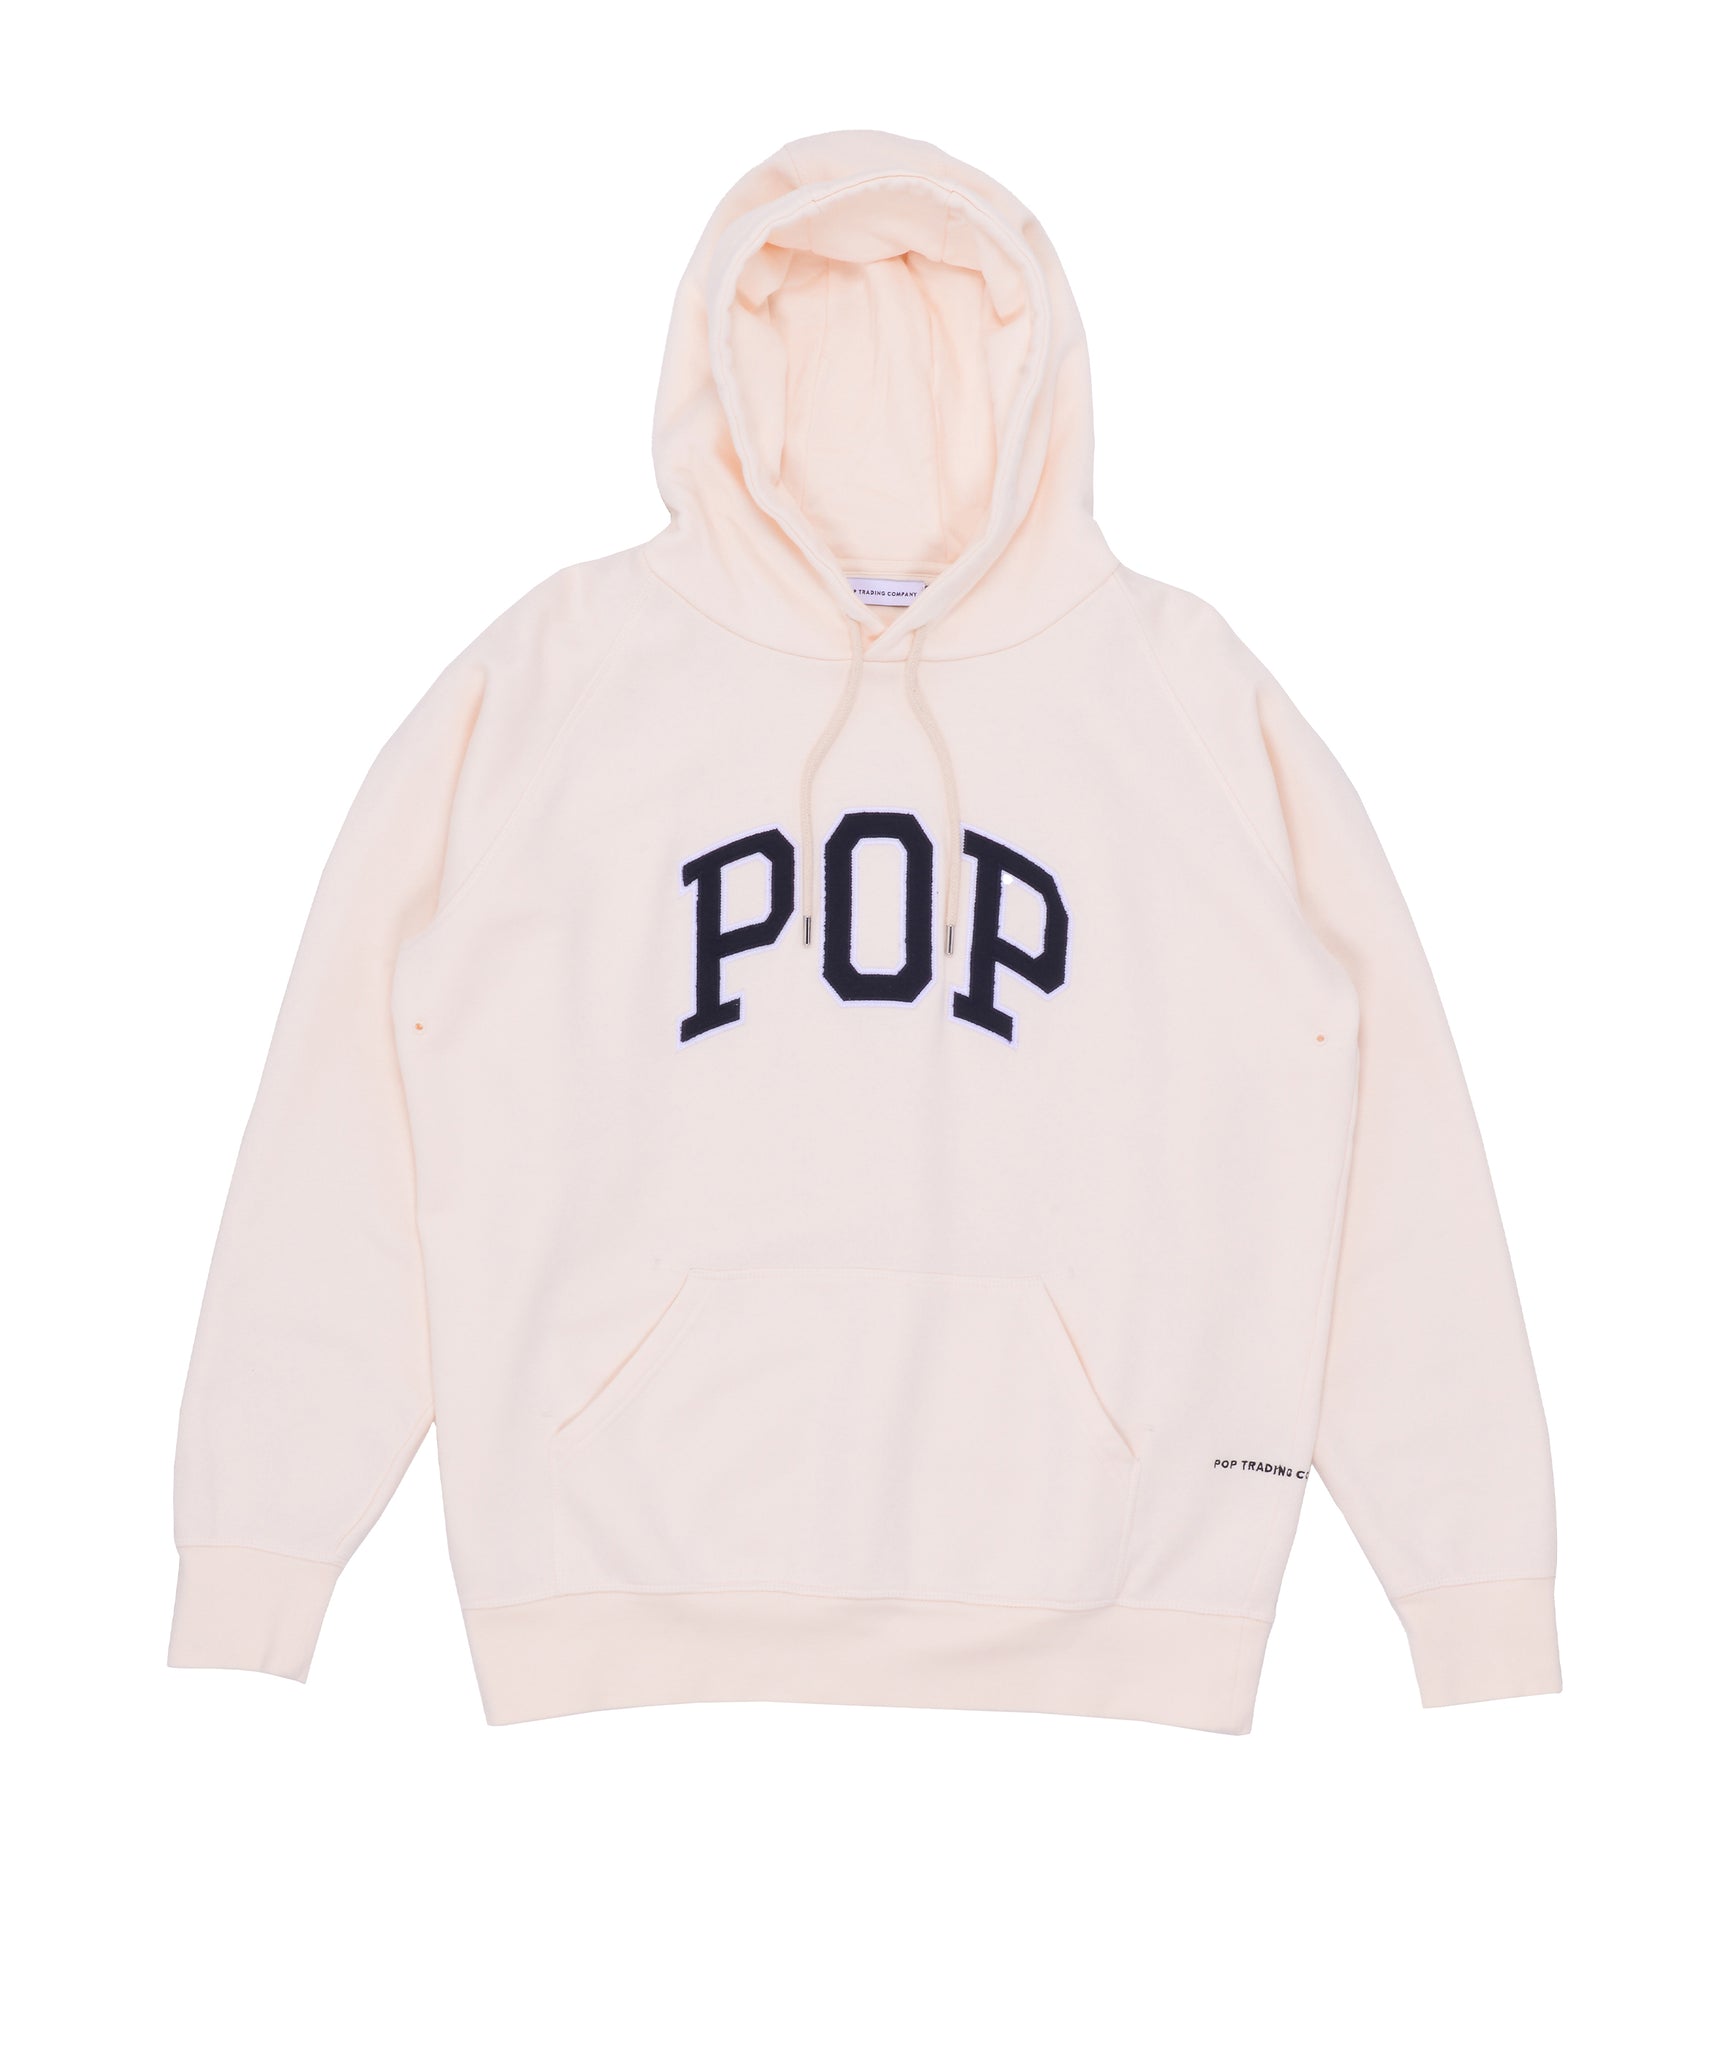 Arch Hooded Sweat - Off-White